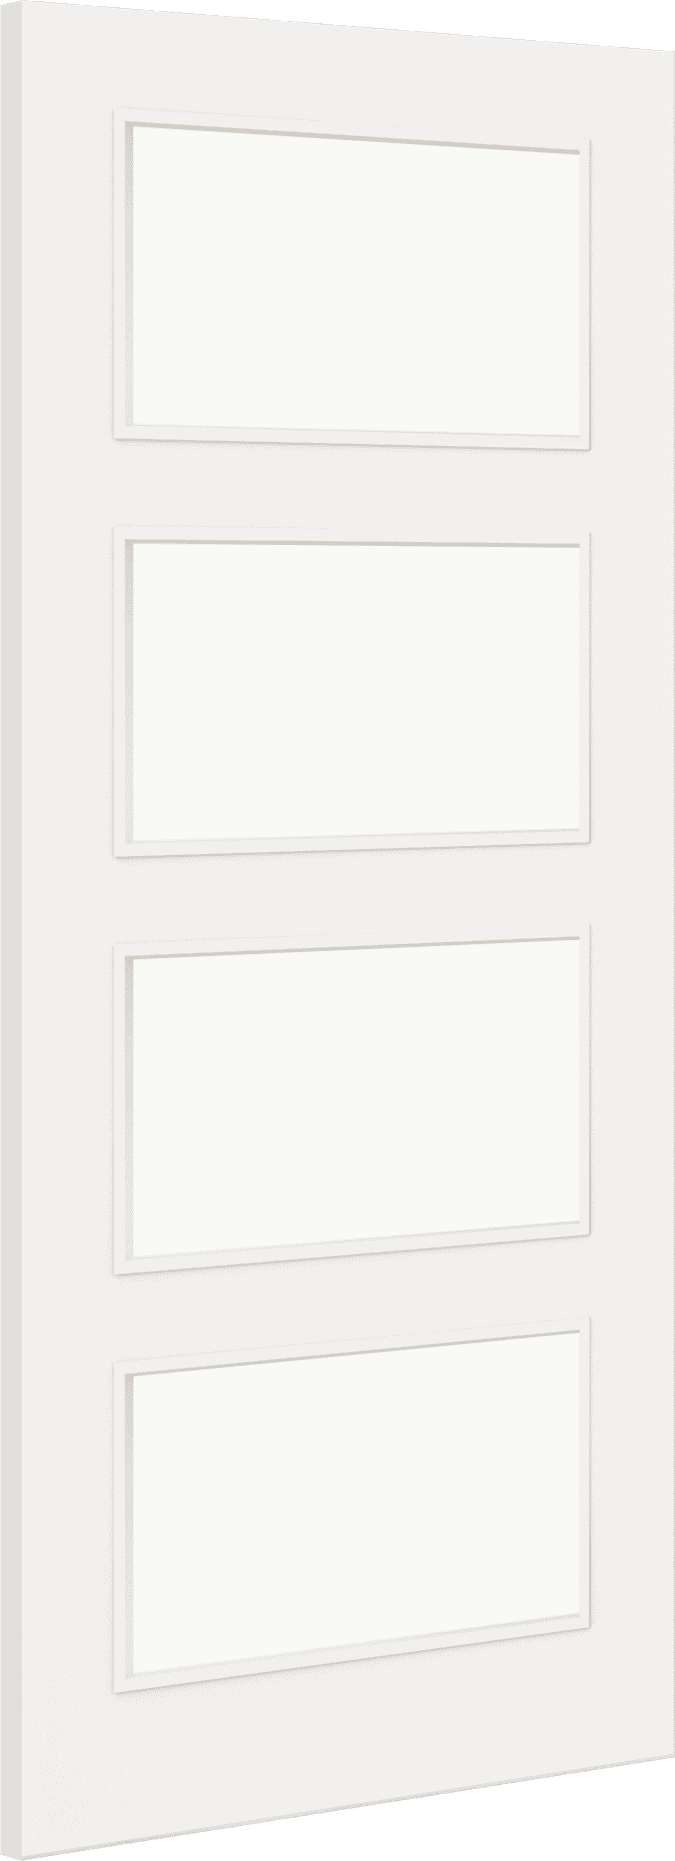 1981mm x 686mm x 44mm (27") Architectural Paint Grade White 04 Clear Glazed Fire Door Blank